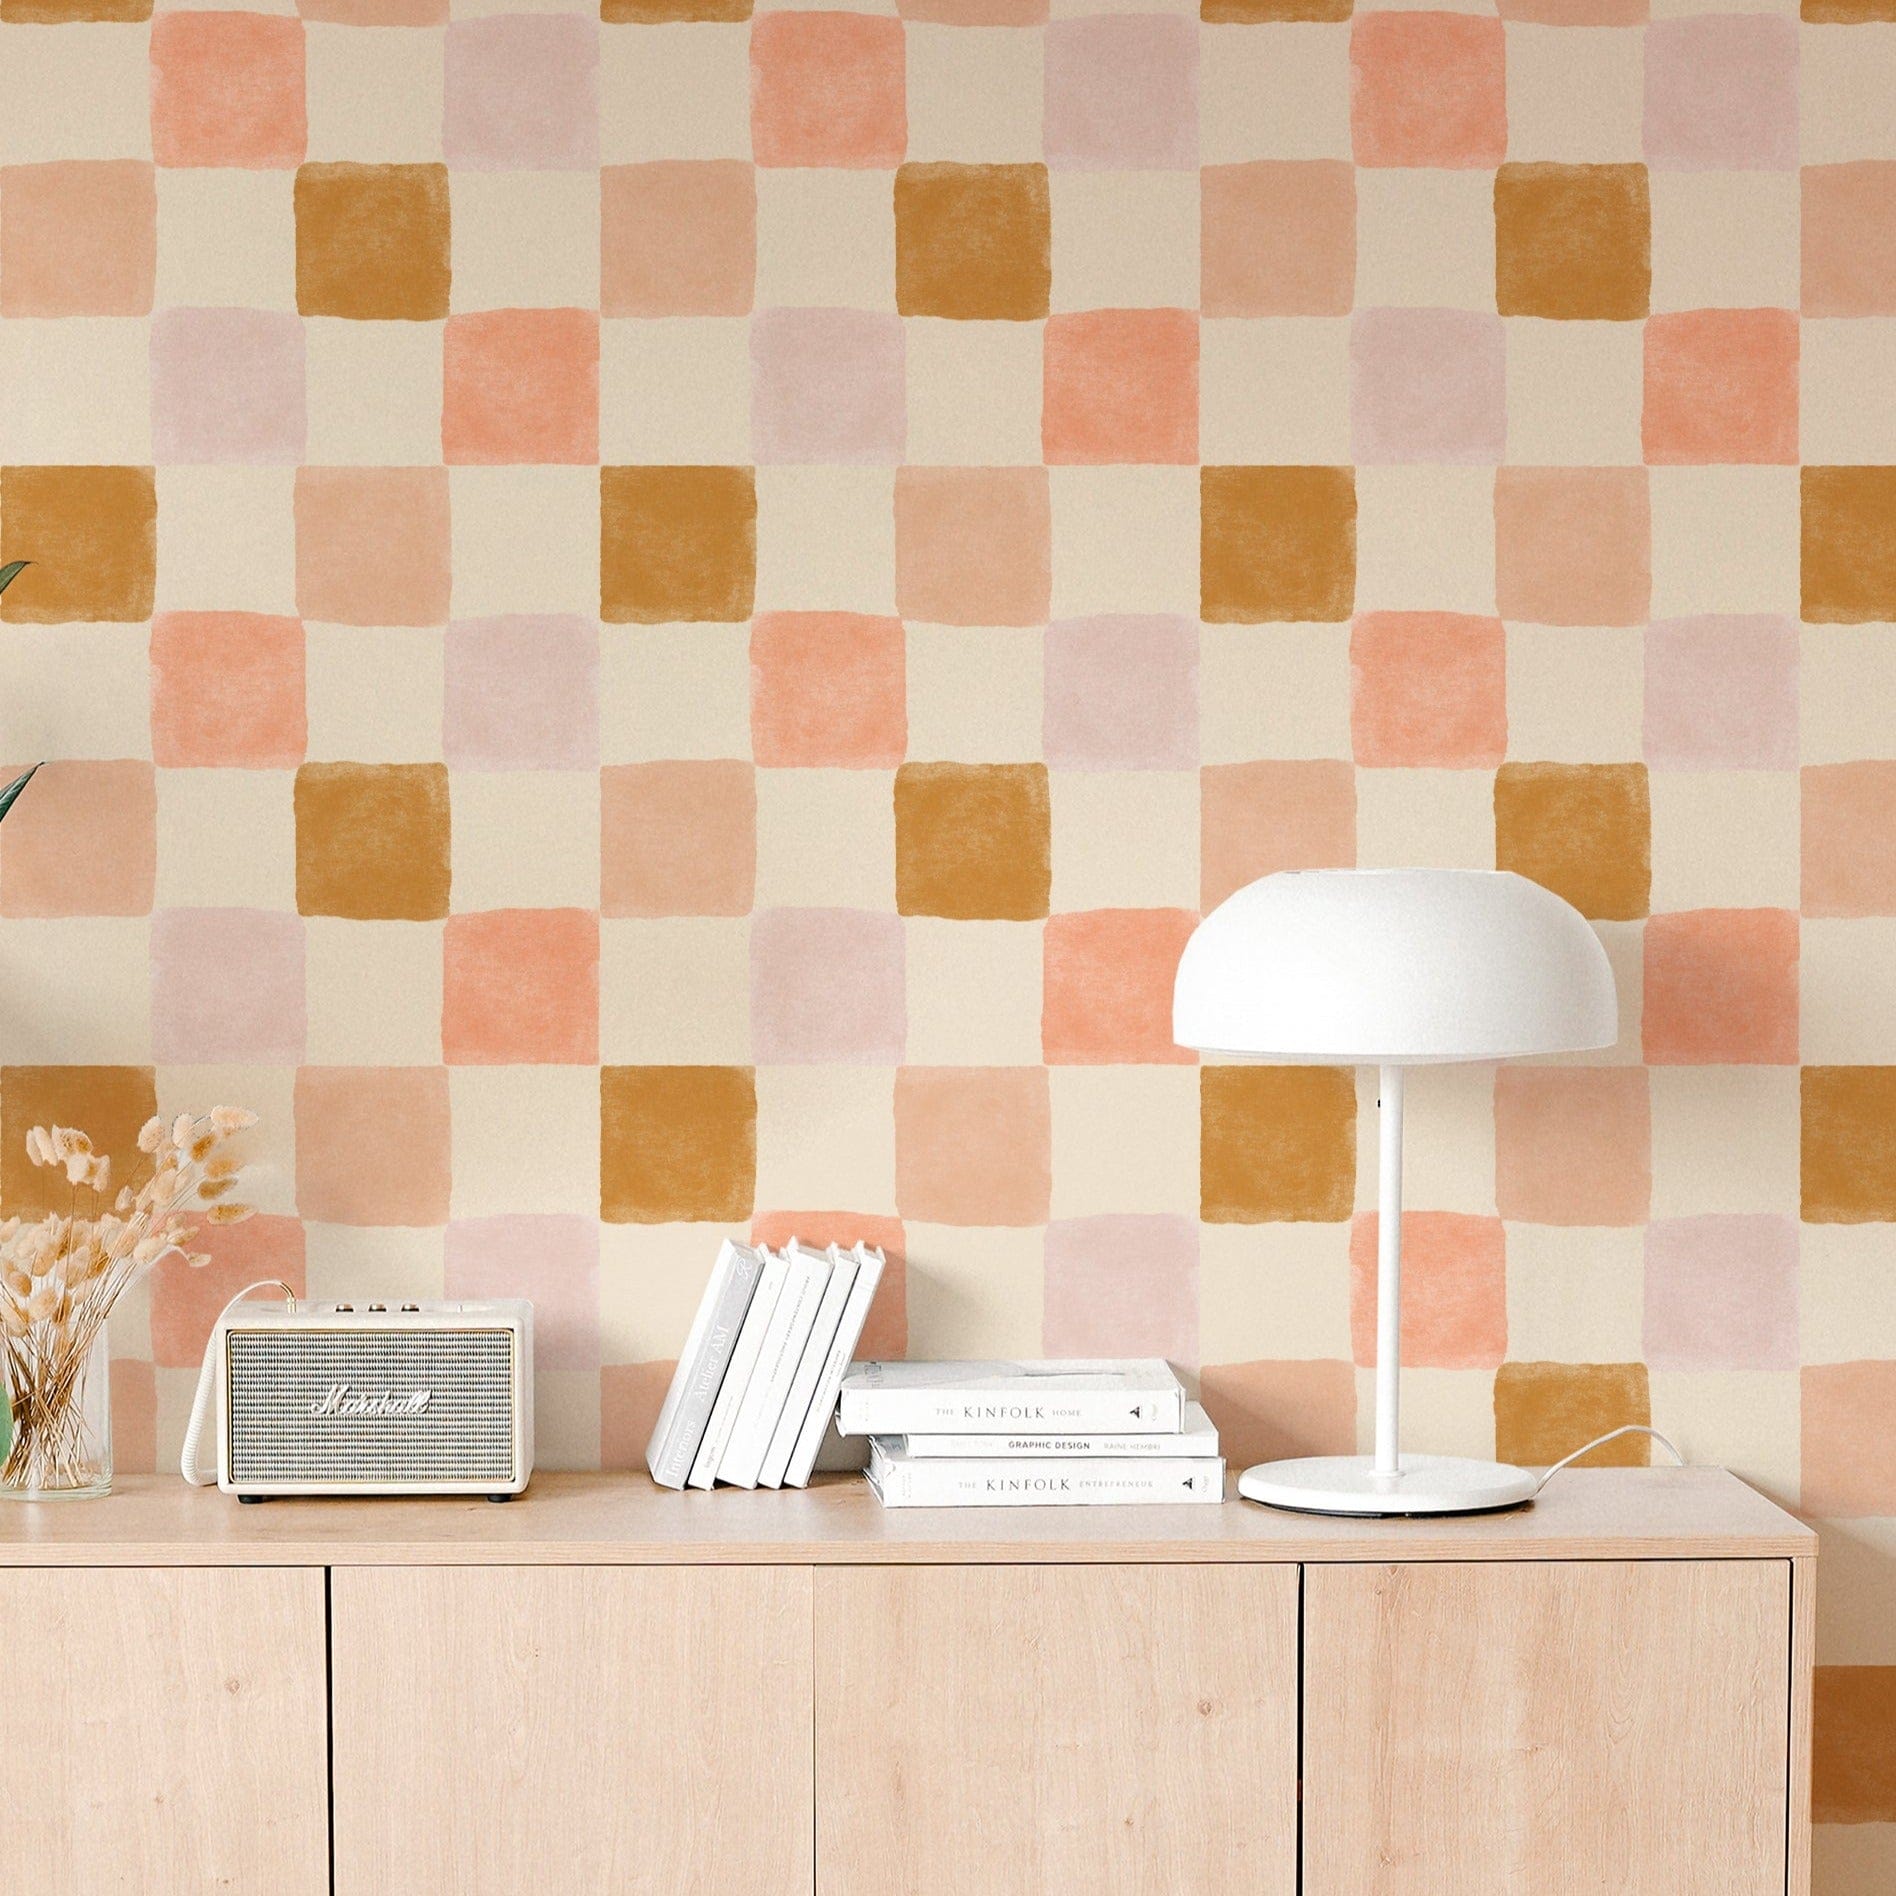 Charlotte Wallpaper in a contemporary living space, featuring large checkered patterns in shades of peach, gold, and light pink on a cream background, enhancing the room's modern aesthetic with natural wood furniture and minimalist decor